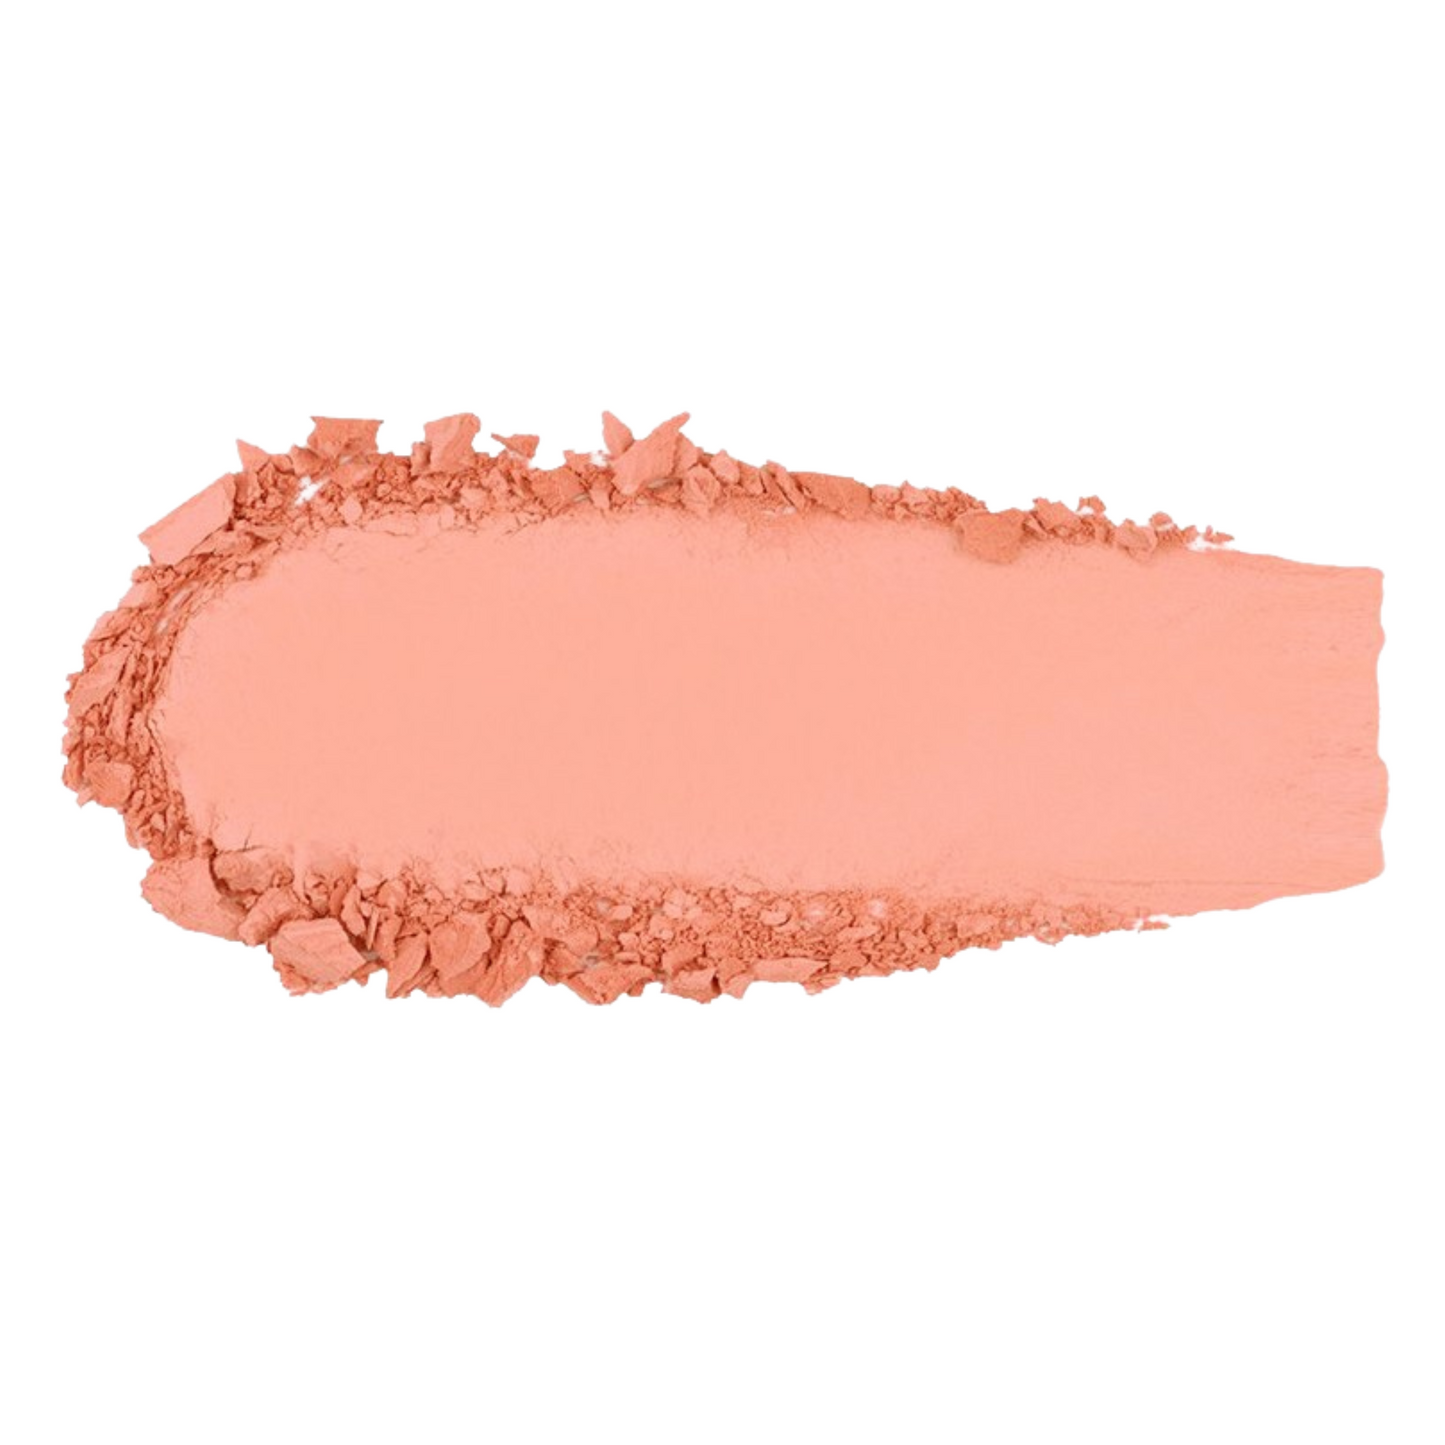 Moart Velvet Blusher contains hyaluronic acid, province rose extract, rosemary leaf extract, aloe vera leaf extract, and lily extract - formula that prevents water from evaporation and keeps the easily-dried cheeks moist.